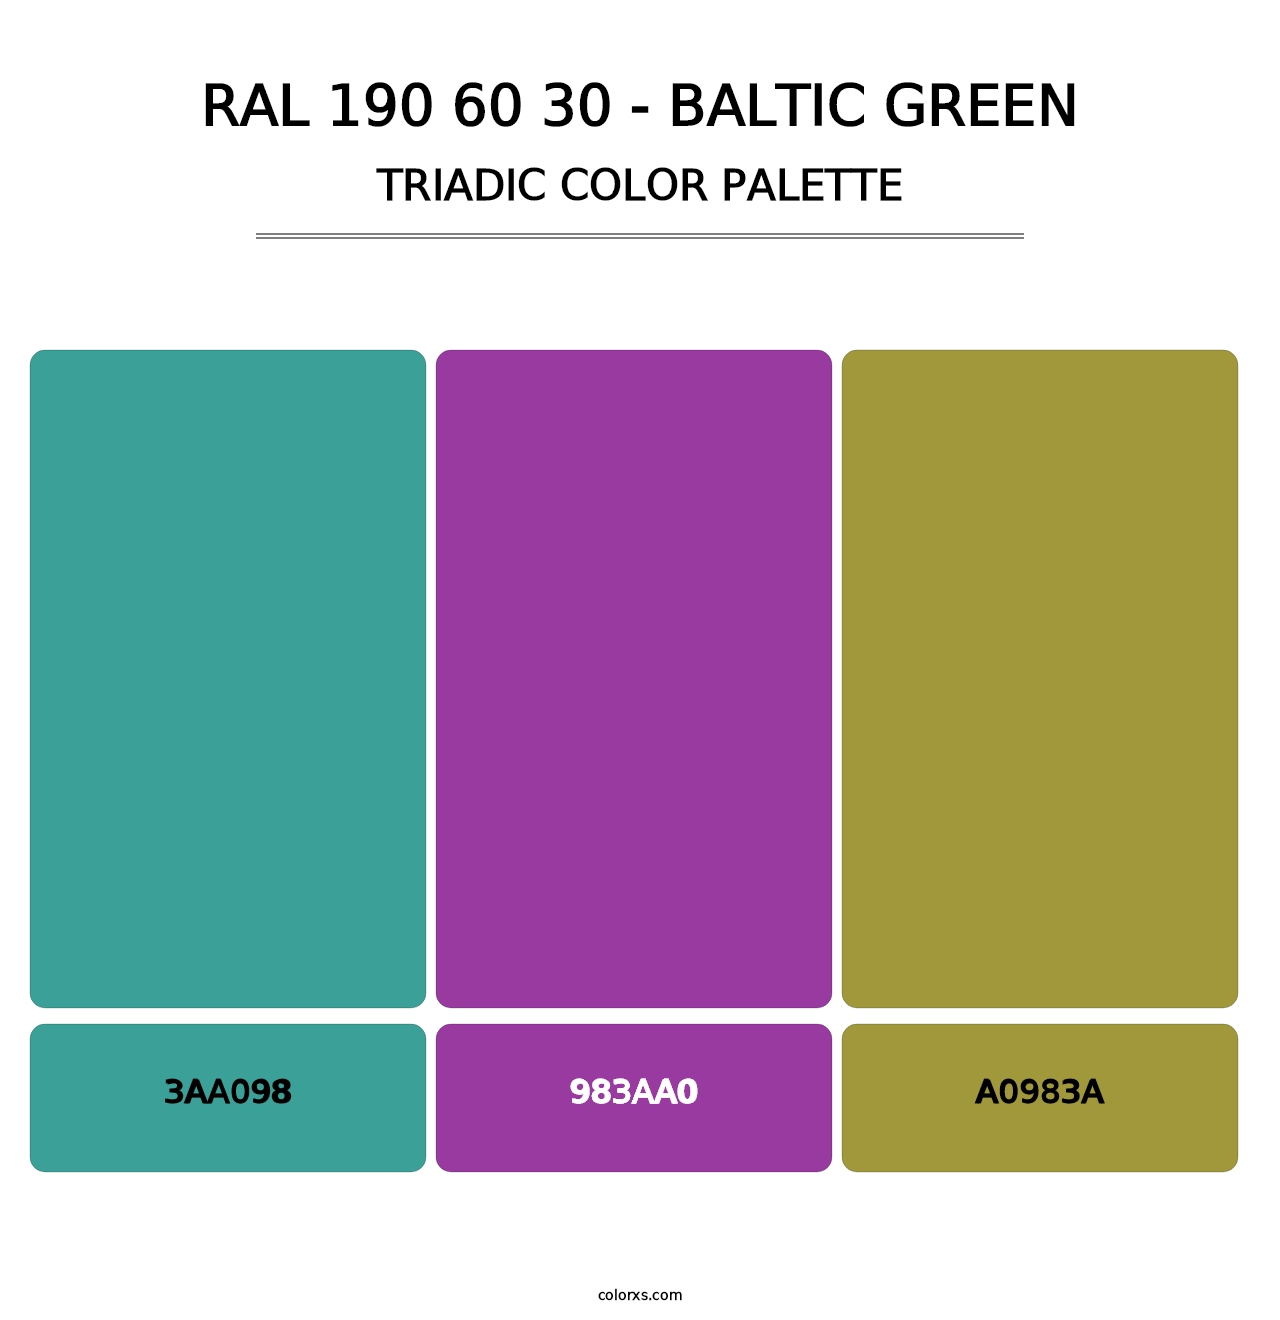 RAL 190 60 30 - Baltic Green - Triadic Color Palette